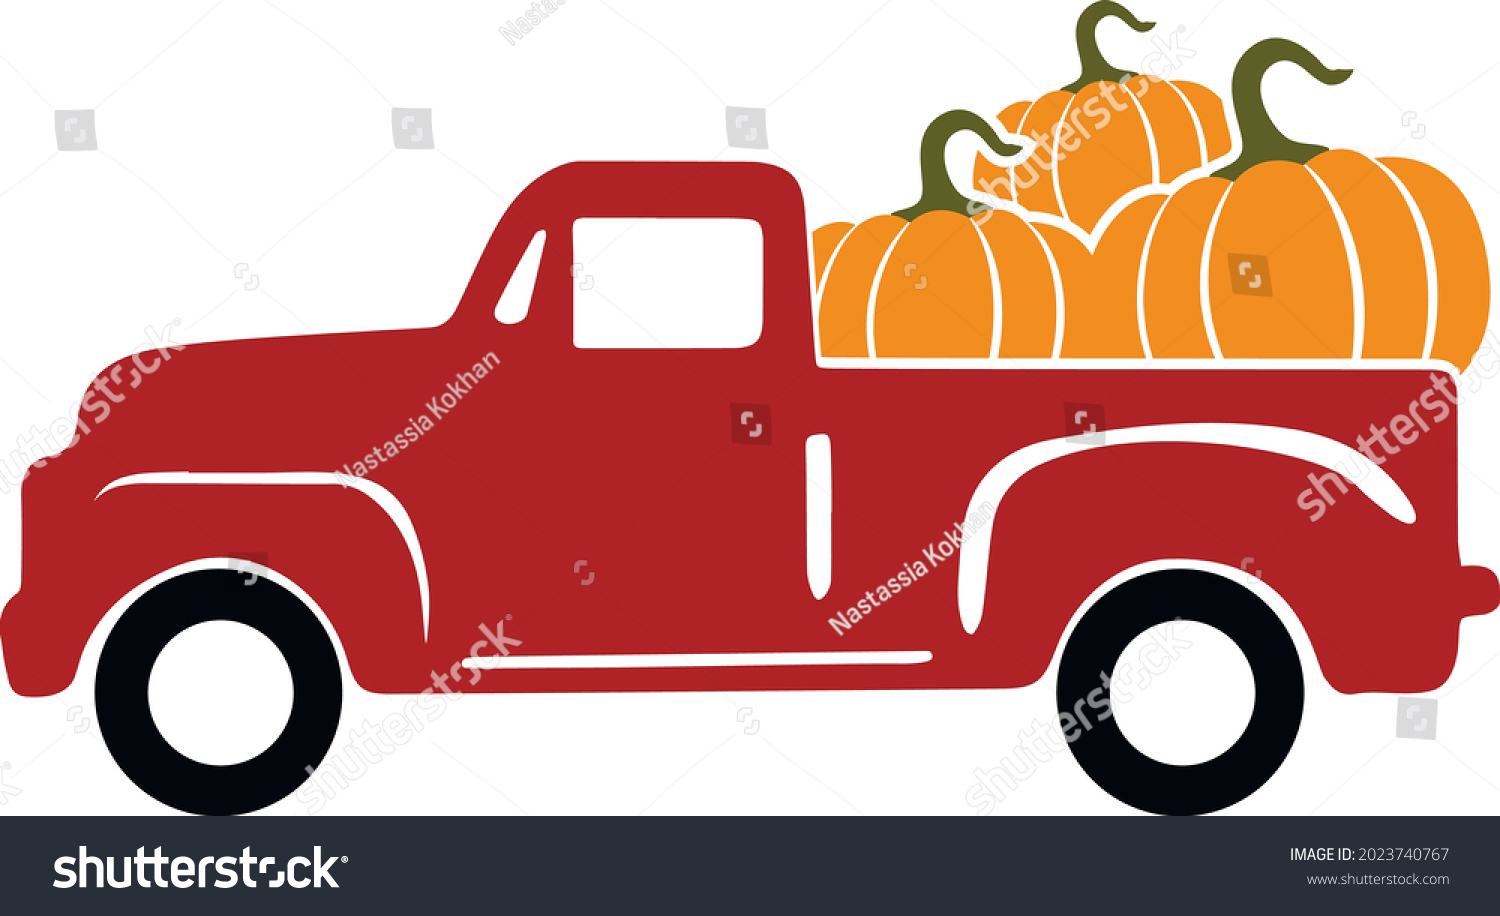 SVG of Fall truck with pumpkin svg vector Illustration isolated on white background.Happy fall truck shirt design. Pumpkin truck for autumn shirt design. Fall sublimation. Hello autumn truck with pumpkin svg svg